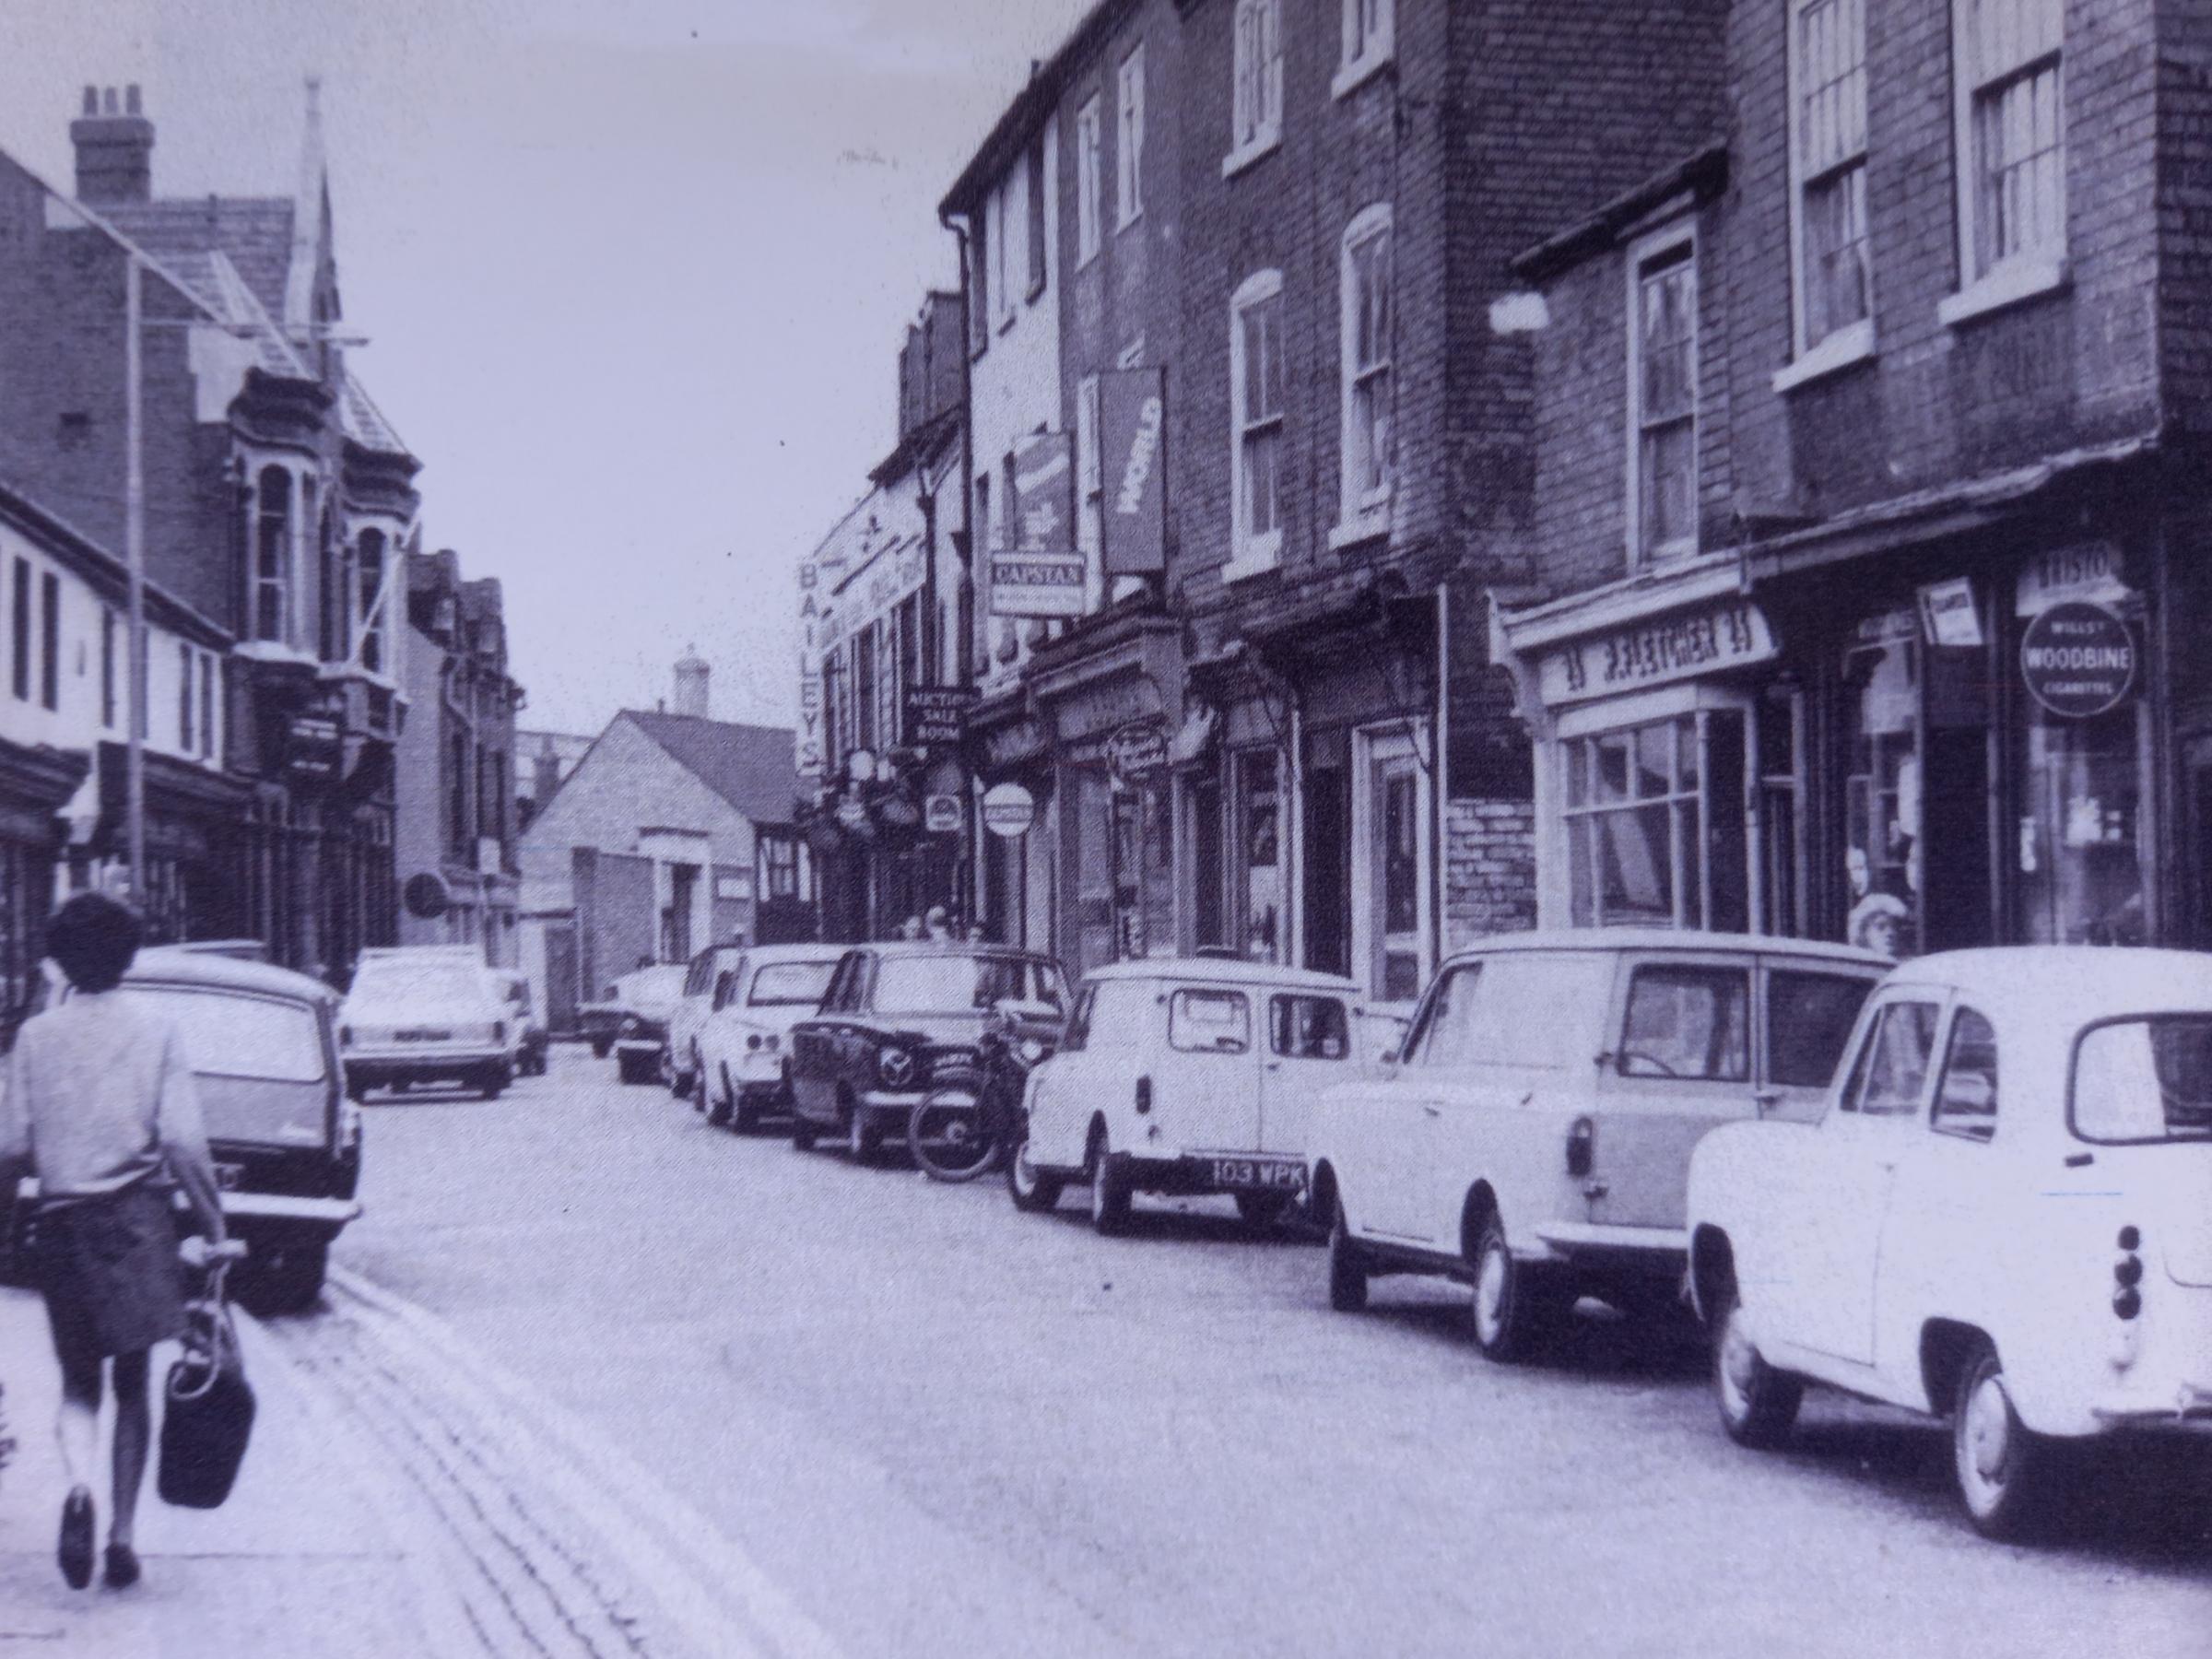 Silver Street in the 1960s, quite a quaint little thoroughfare